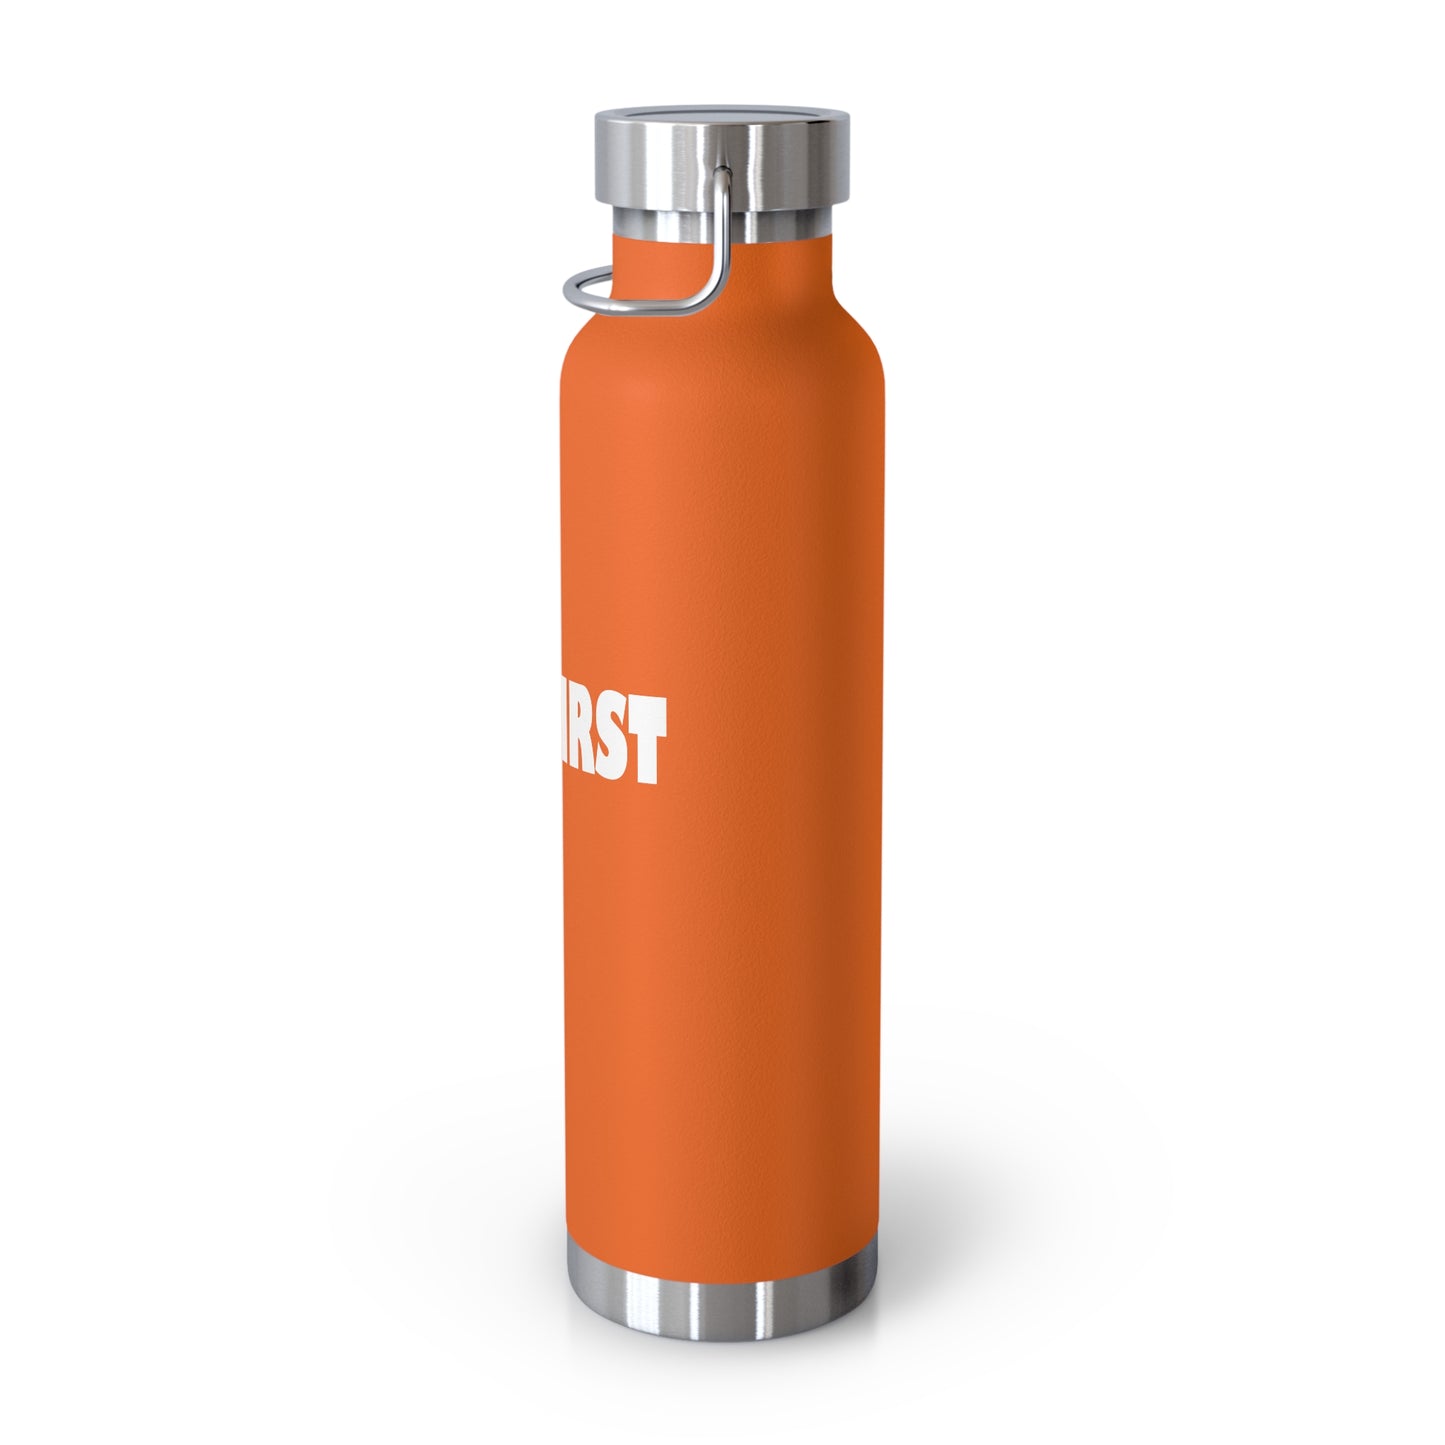 YAH FIRST 22oz Copper Vacuum Insulated Bottle